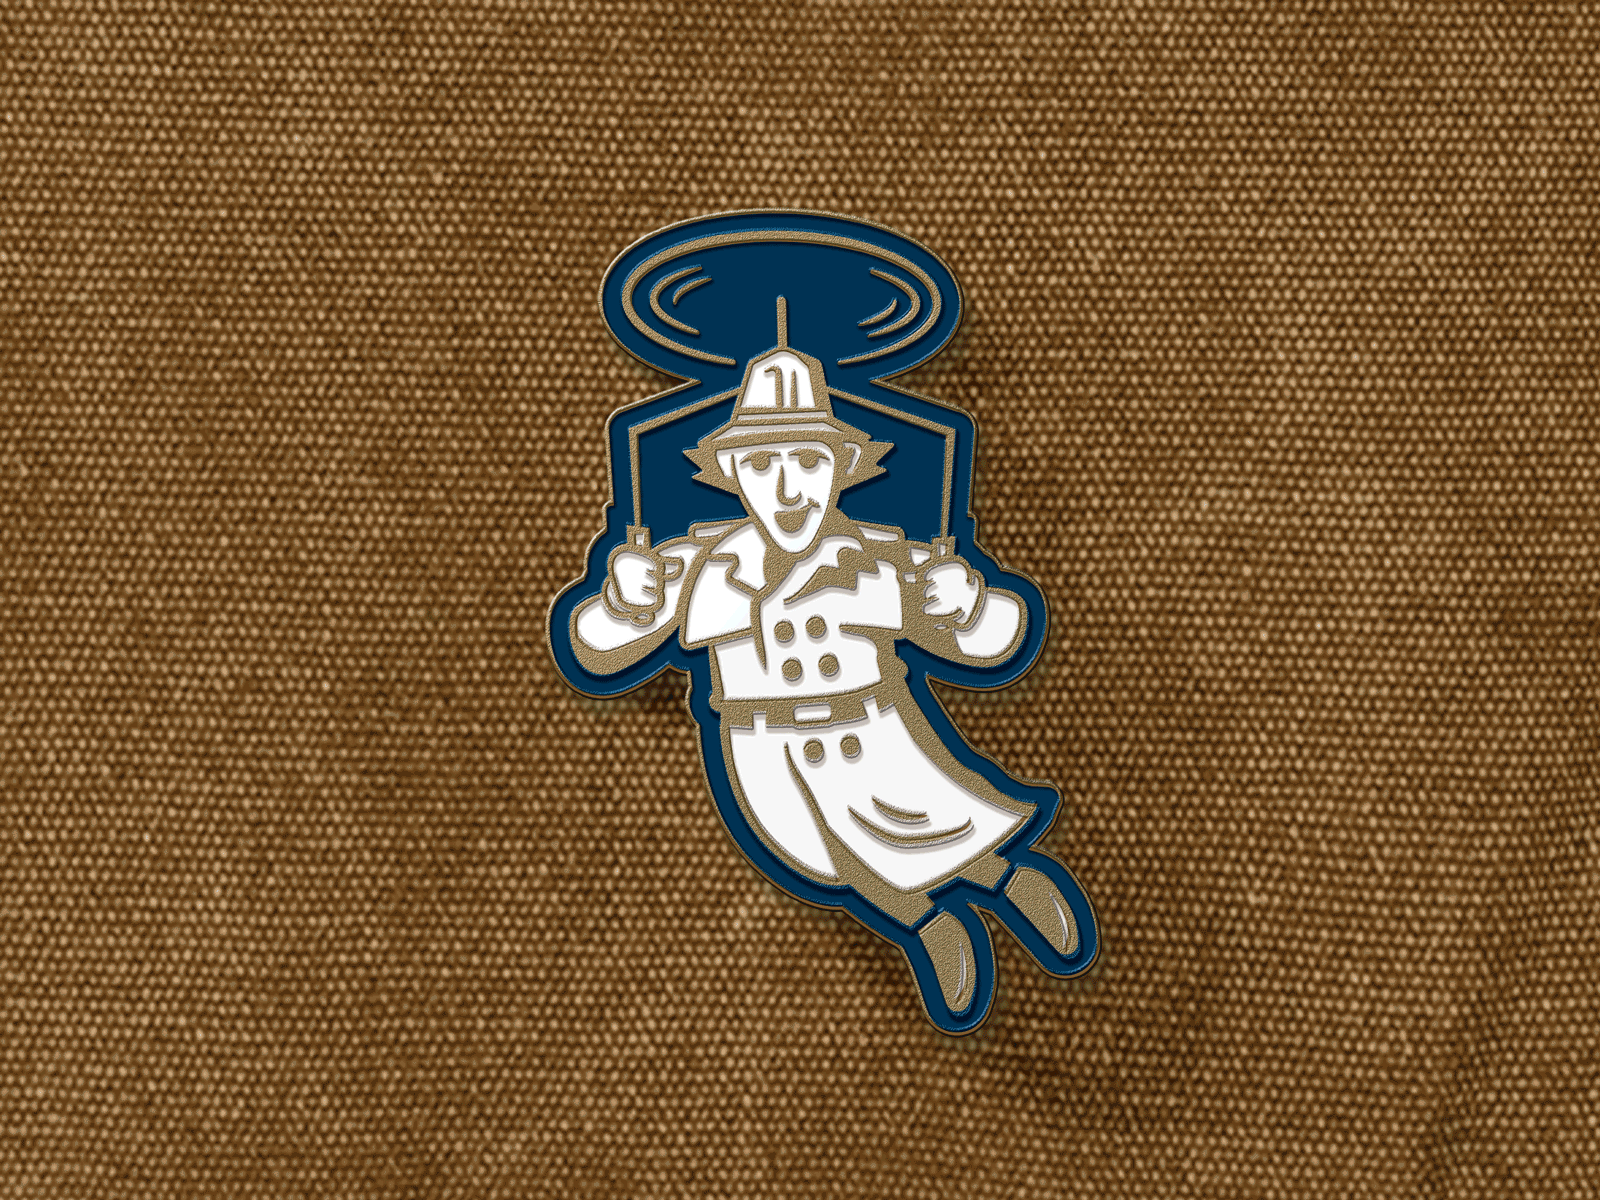 Go Go Gadget Pin Kickstarter Project 80s 90s accessories classic help illustration mockup project wearables